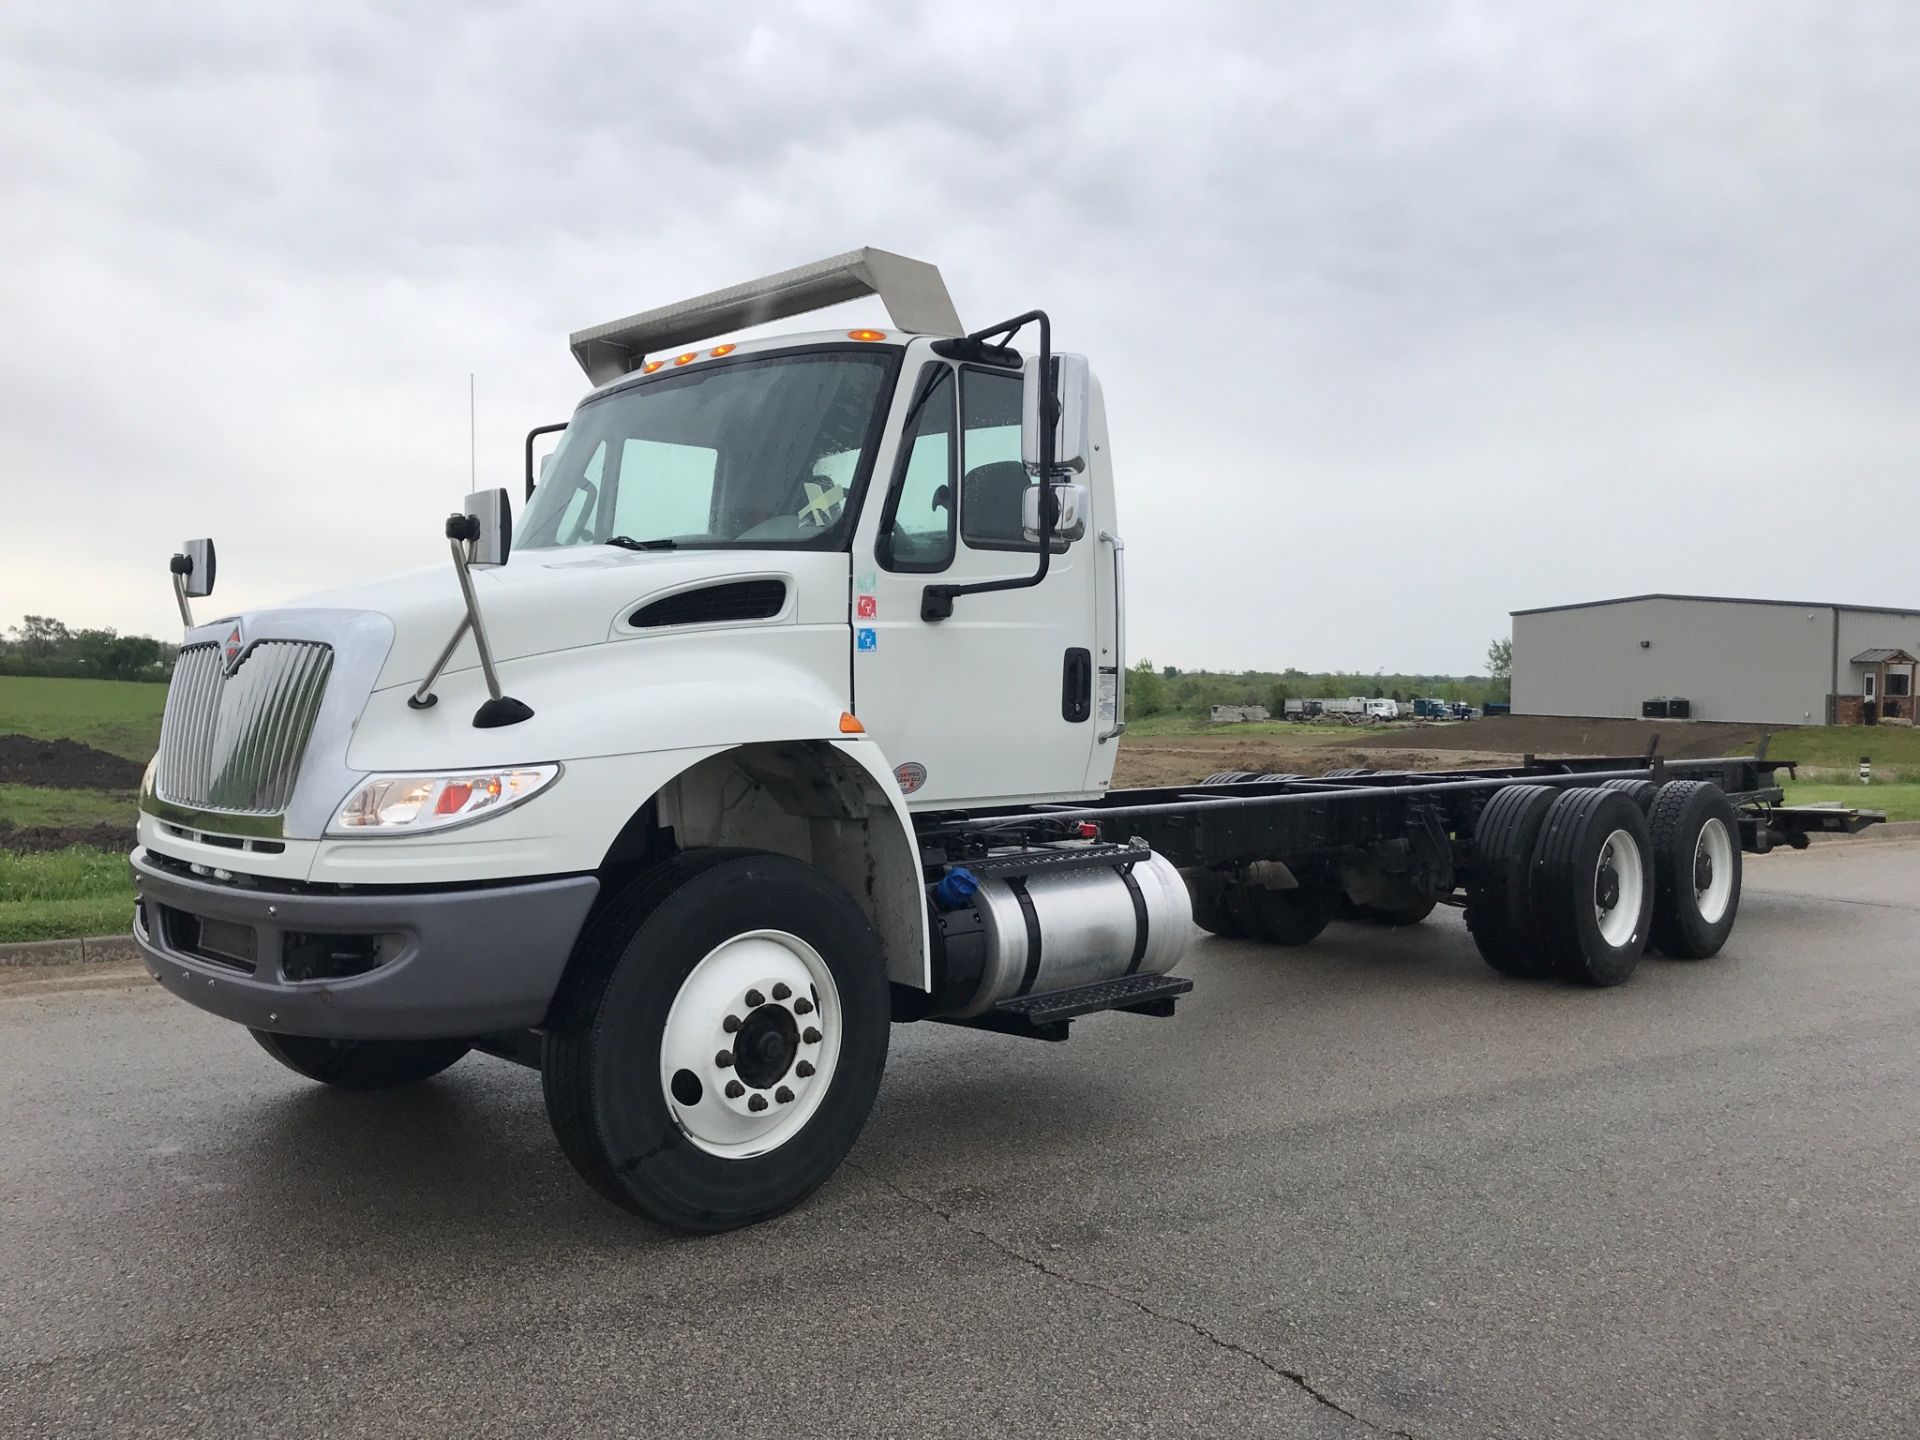 2018 INTERNATIONAL 4400 SBA 6X4 CAB & CHASSIS TRUCK, VIN#: 1HTMSTAR8JH528837, Approx Miles: 63624, -